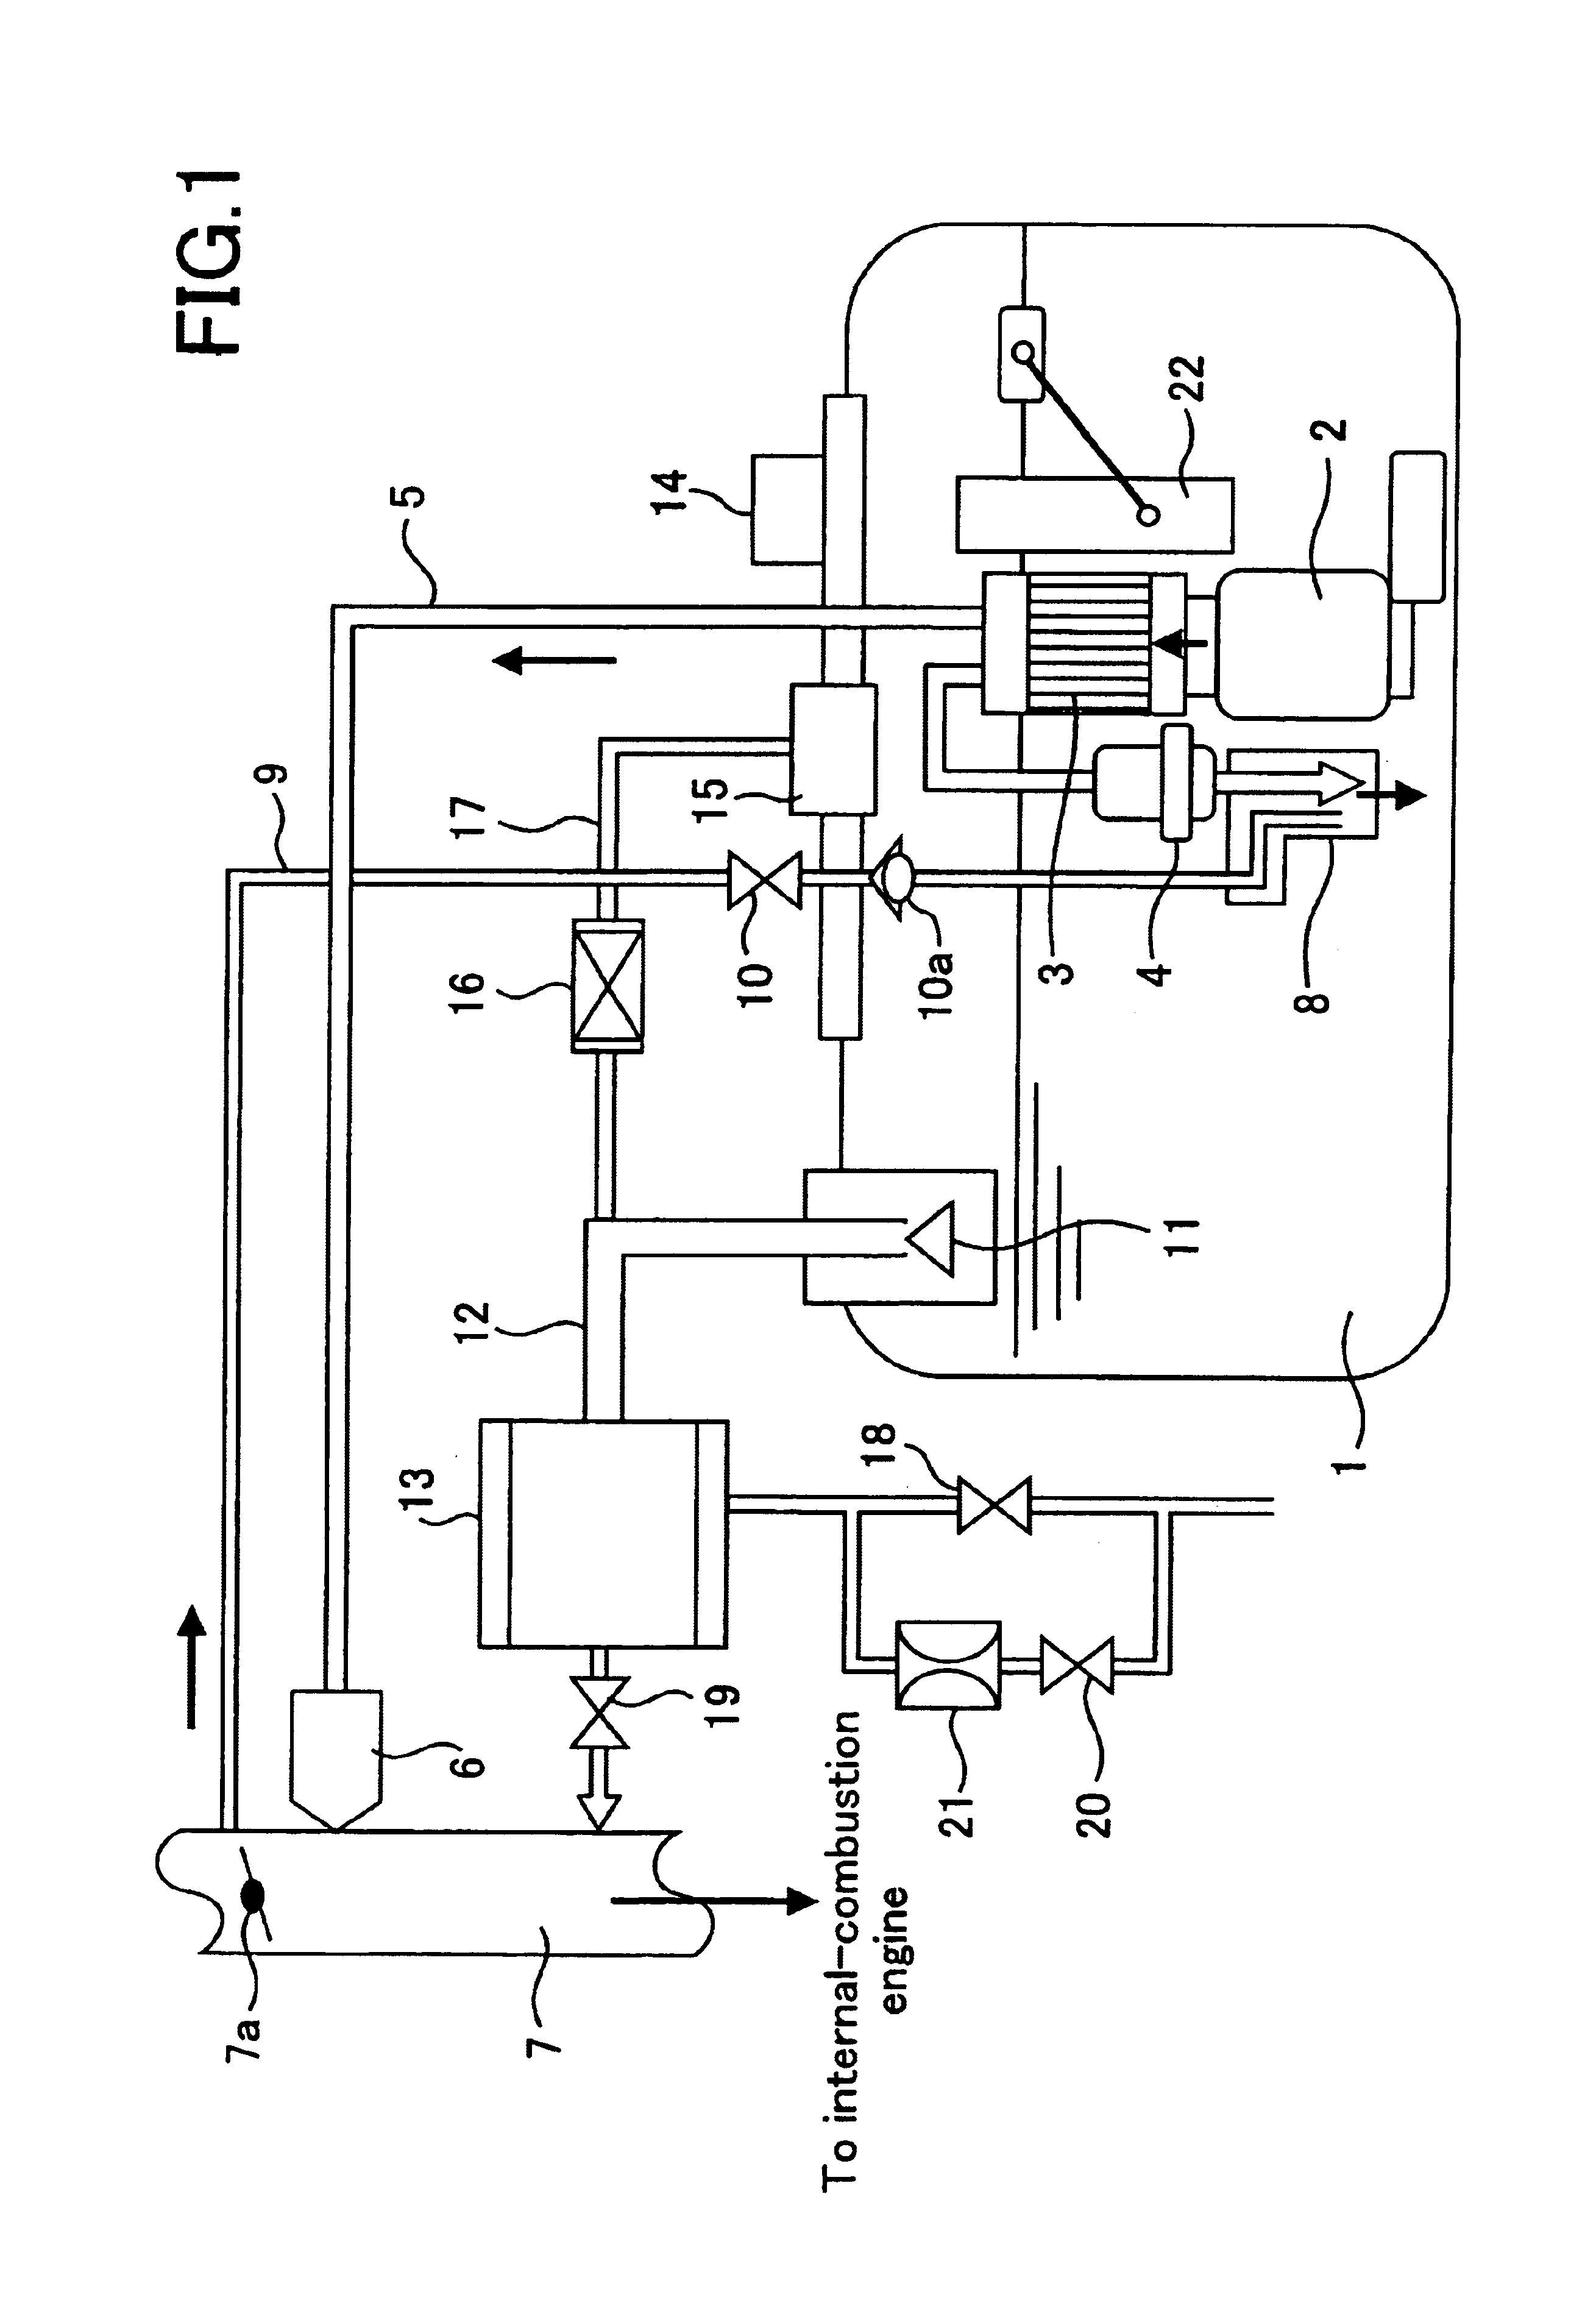 Apparatus for detecting fuel-vapor gas leaks, and vent valve apparatus applied to this apparatus